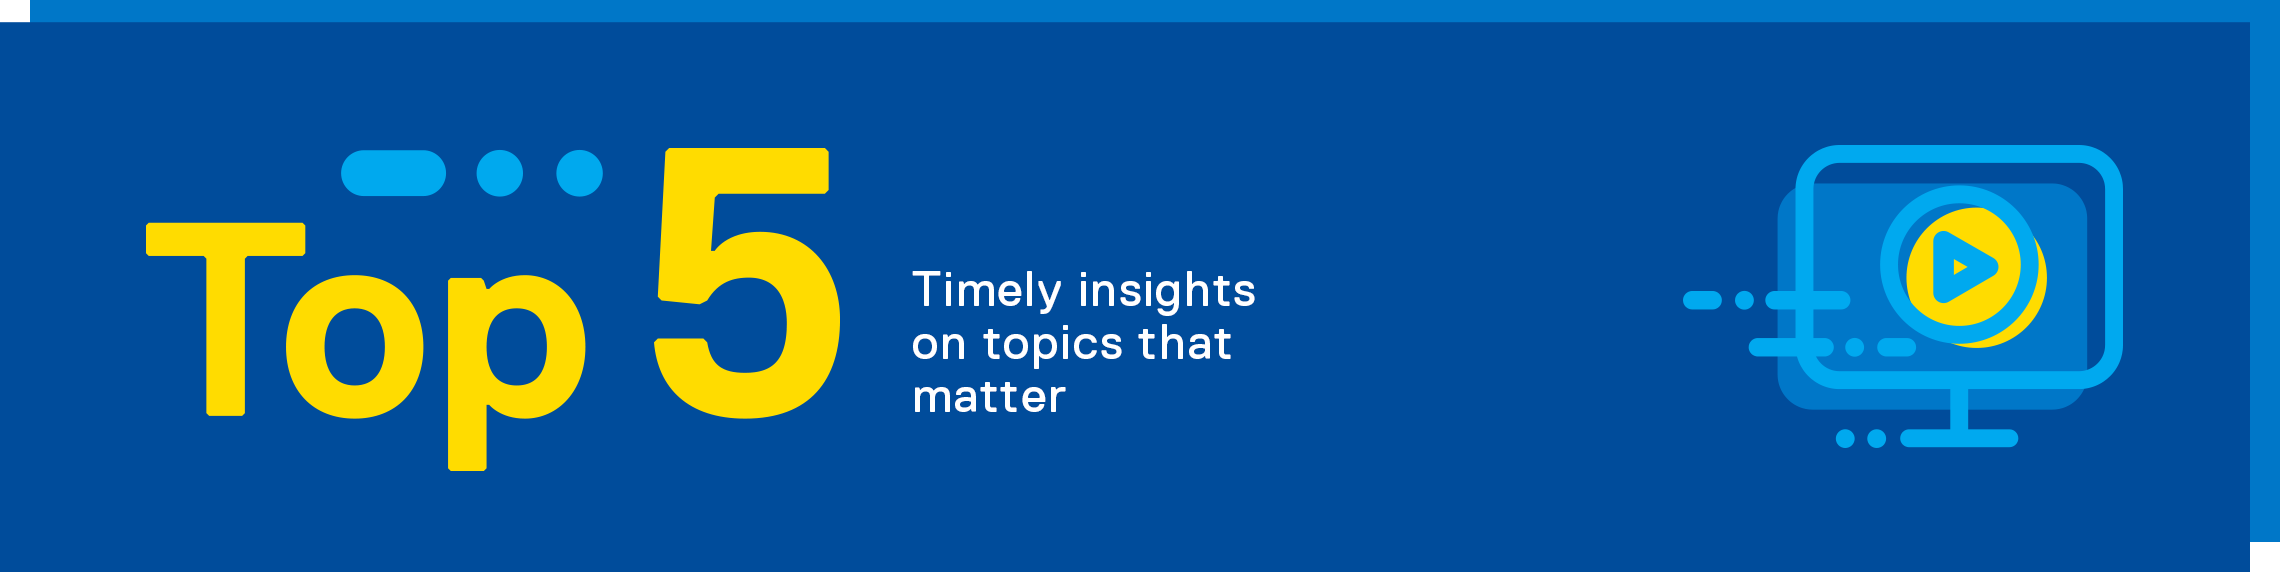 Top 5. Timely insights on topics that matter.